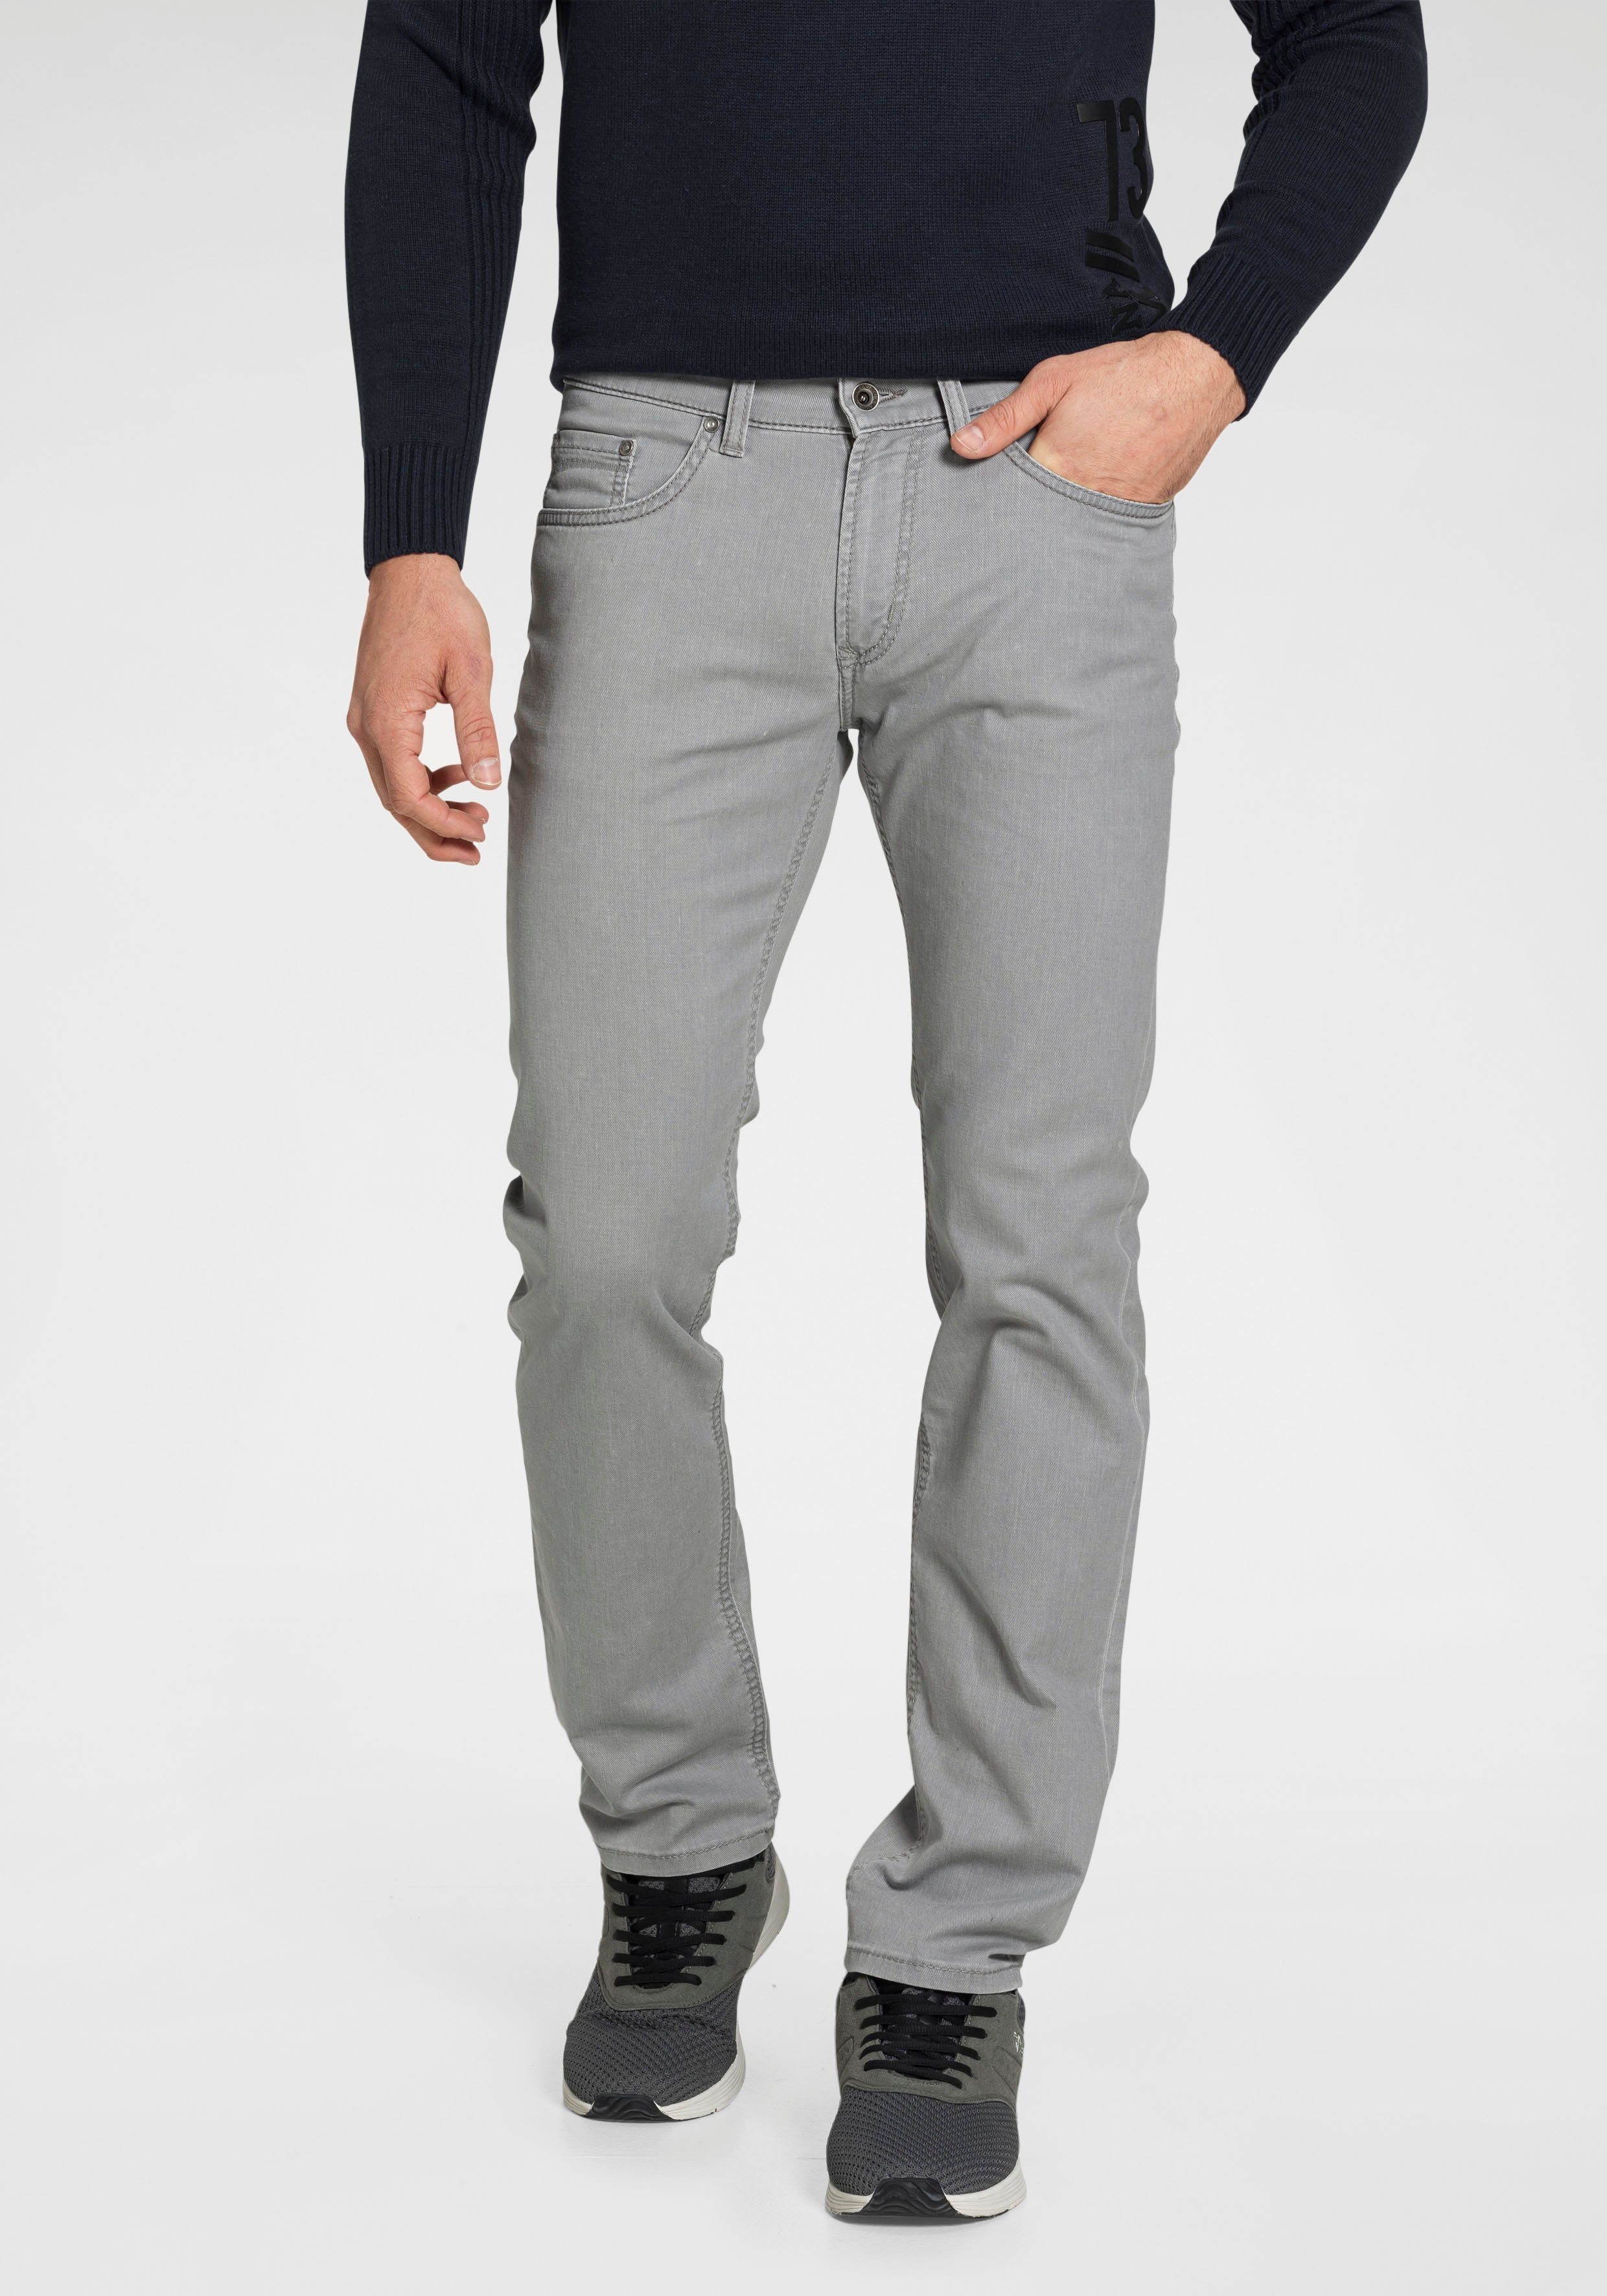 Eric Jeans Pioneer Authentic Straight-Jeans hellgrau